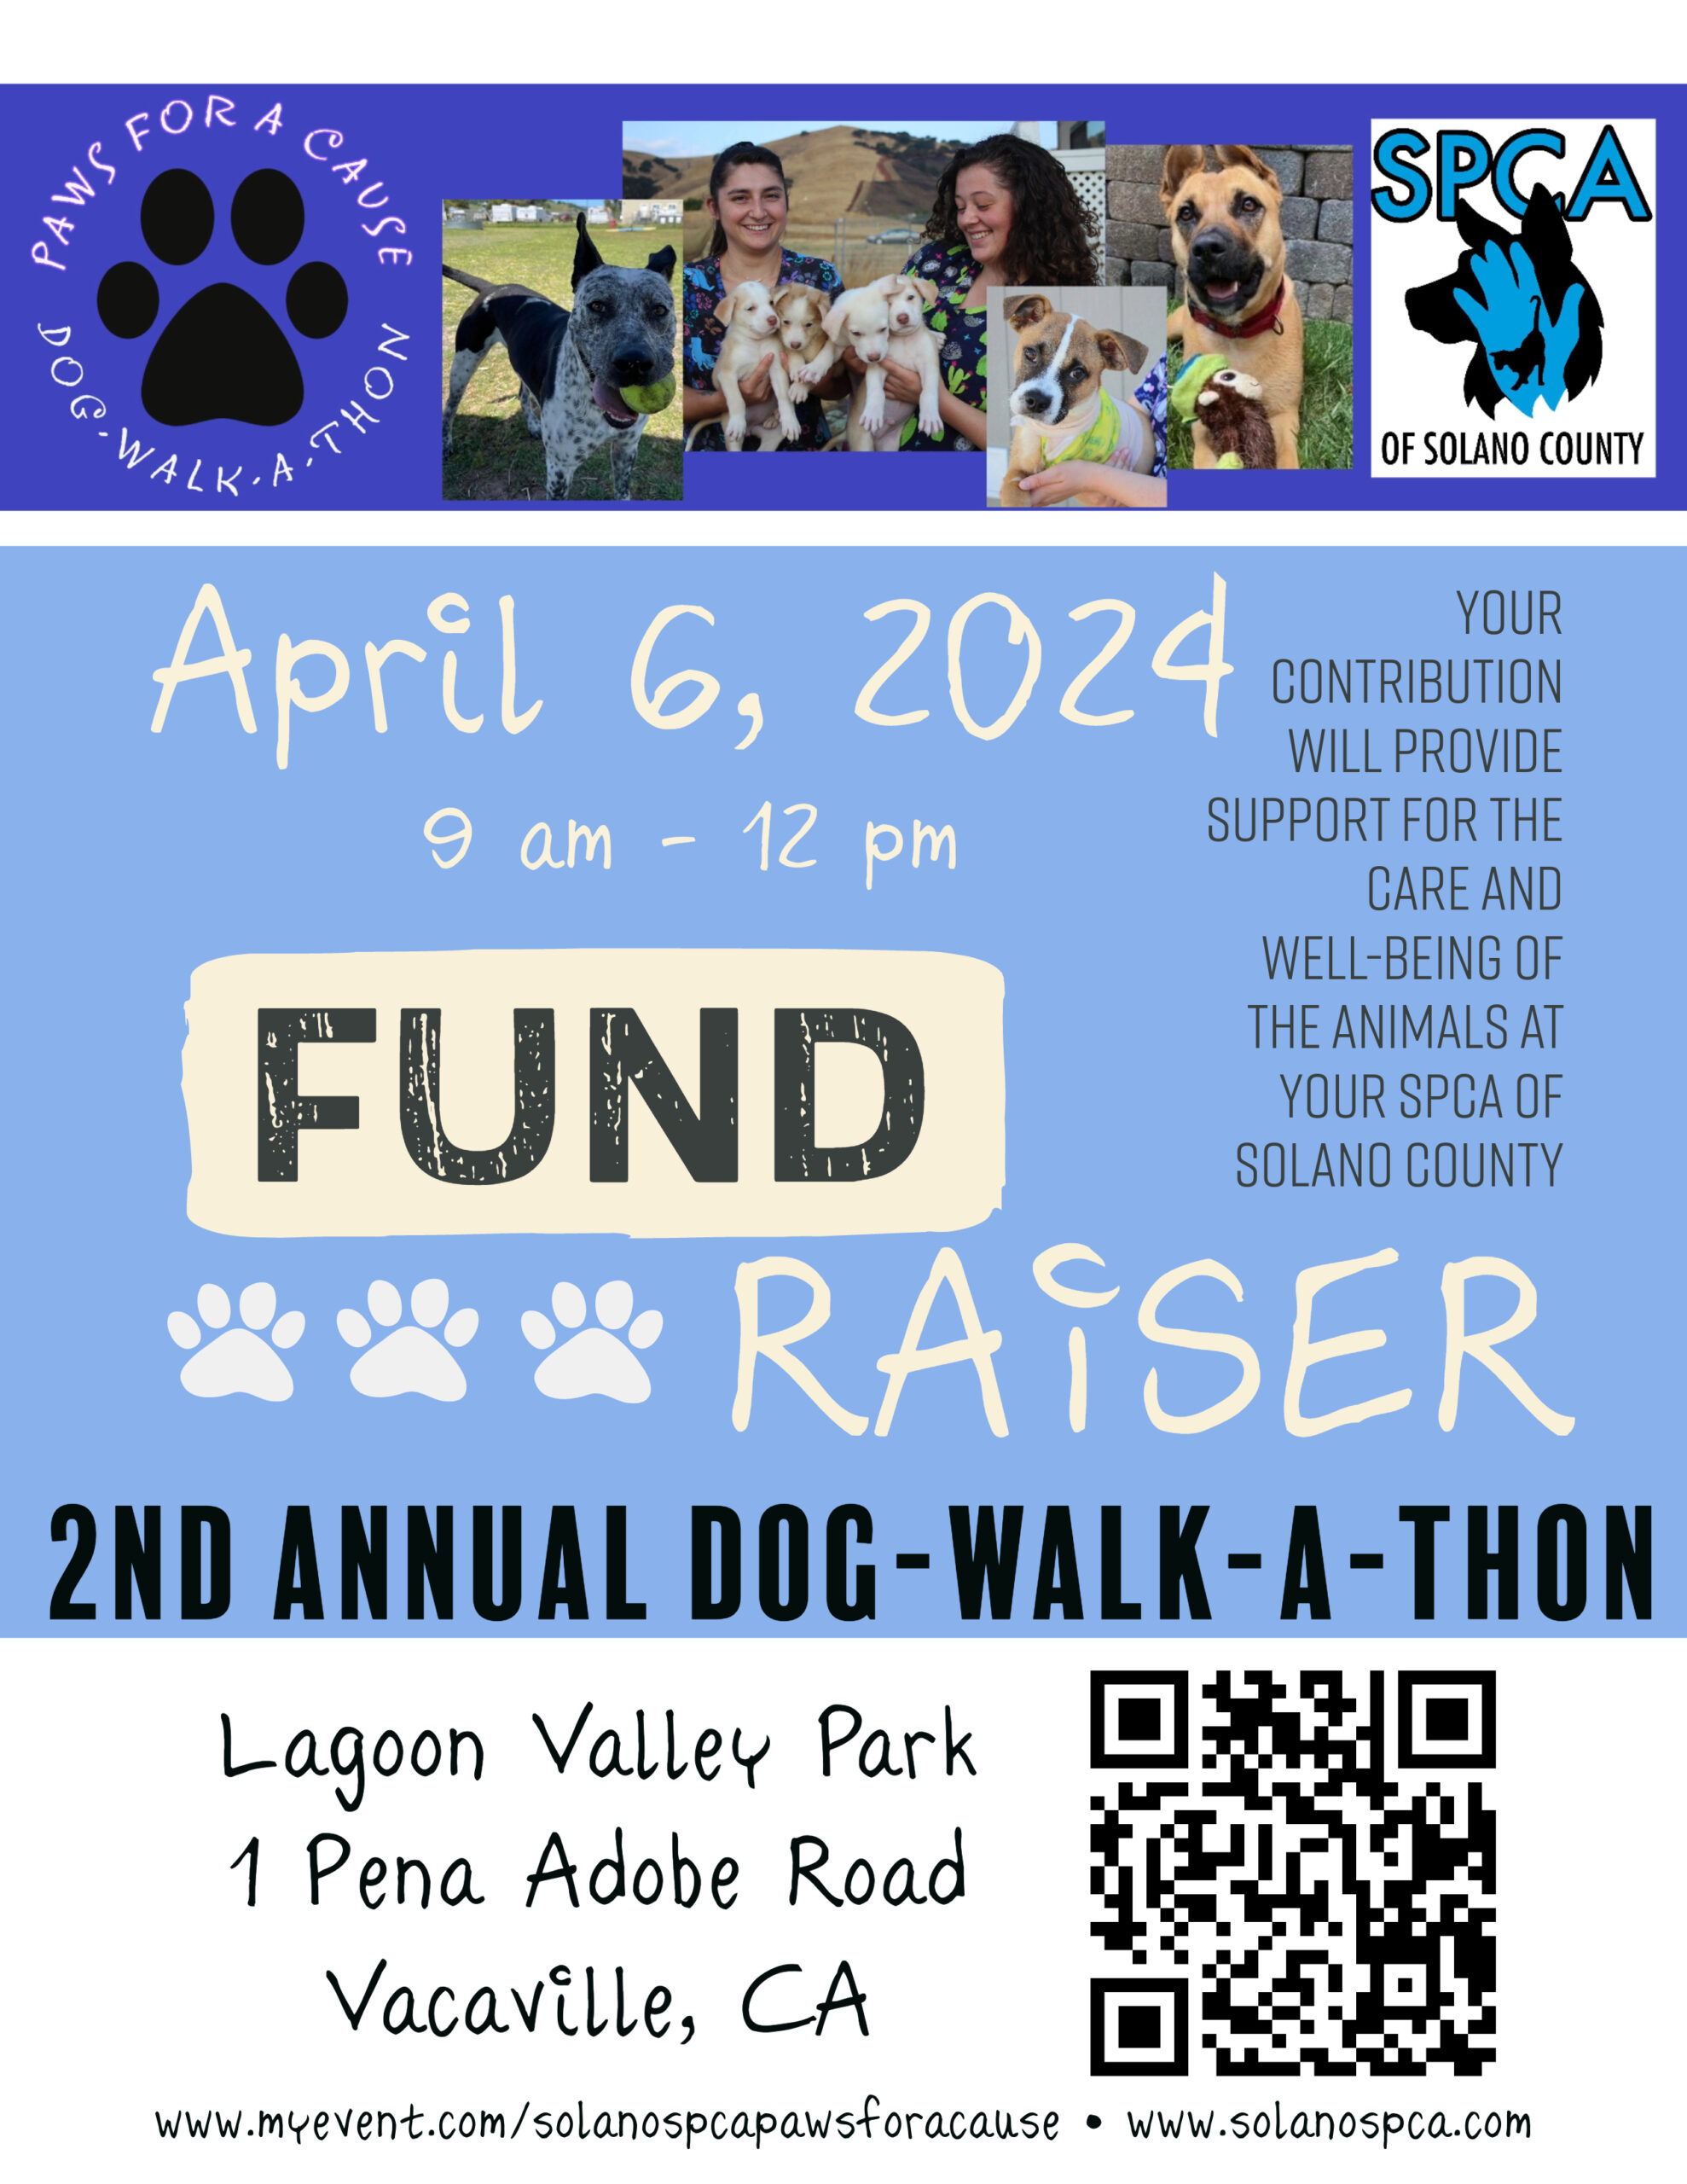 <h1 class="tribe-events-single-event-title">Vacaville: 2nd annual Dog-Walk-A-Thon</h1>